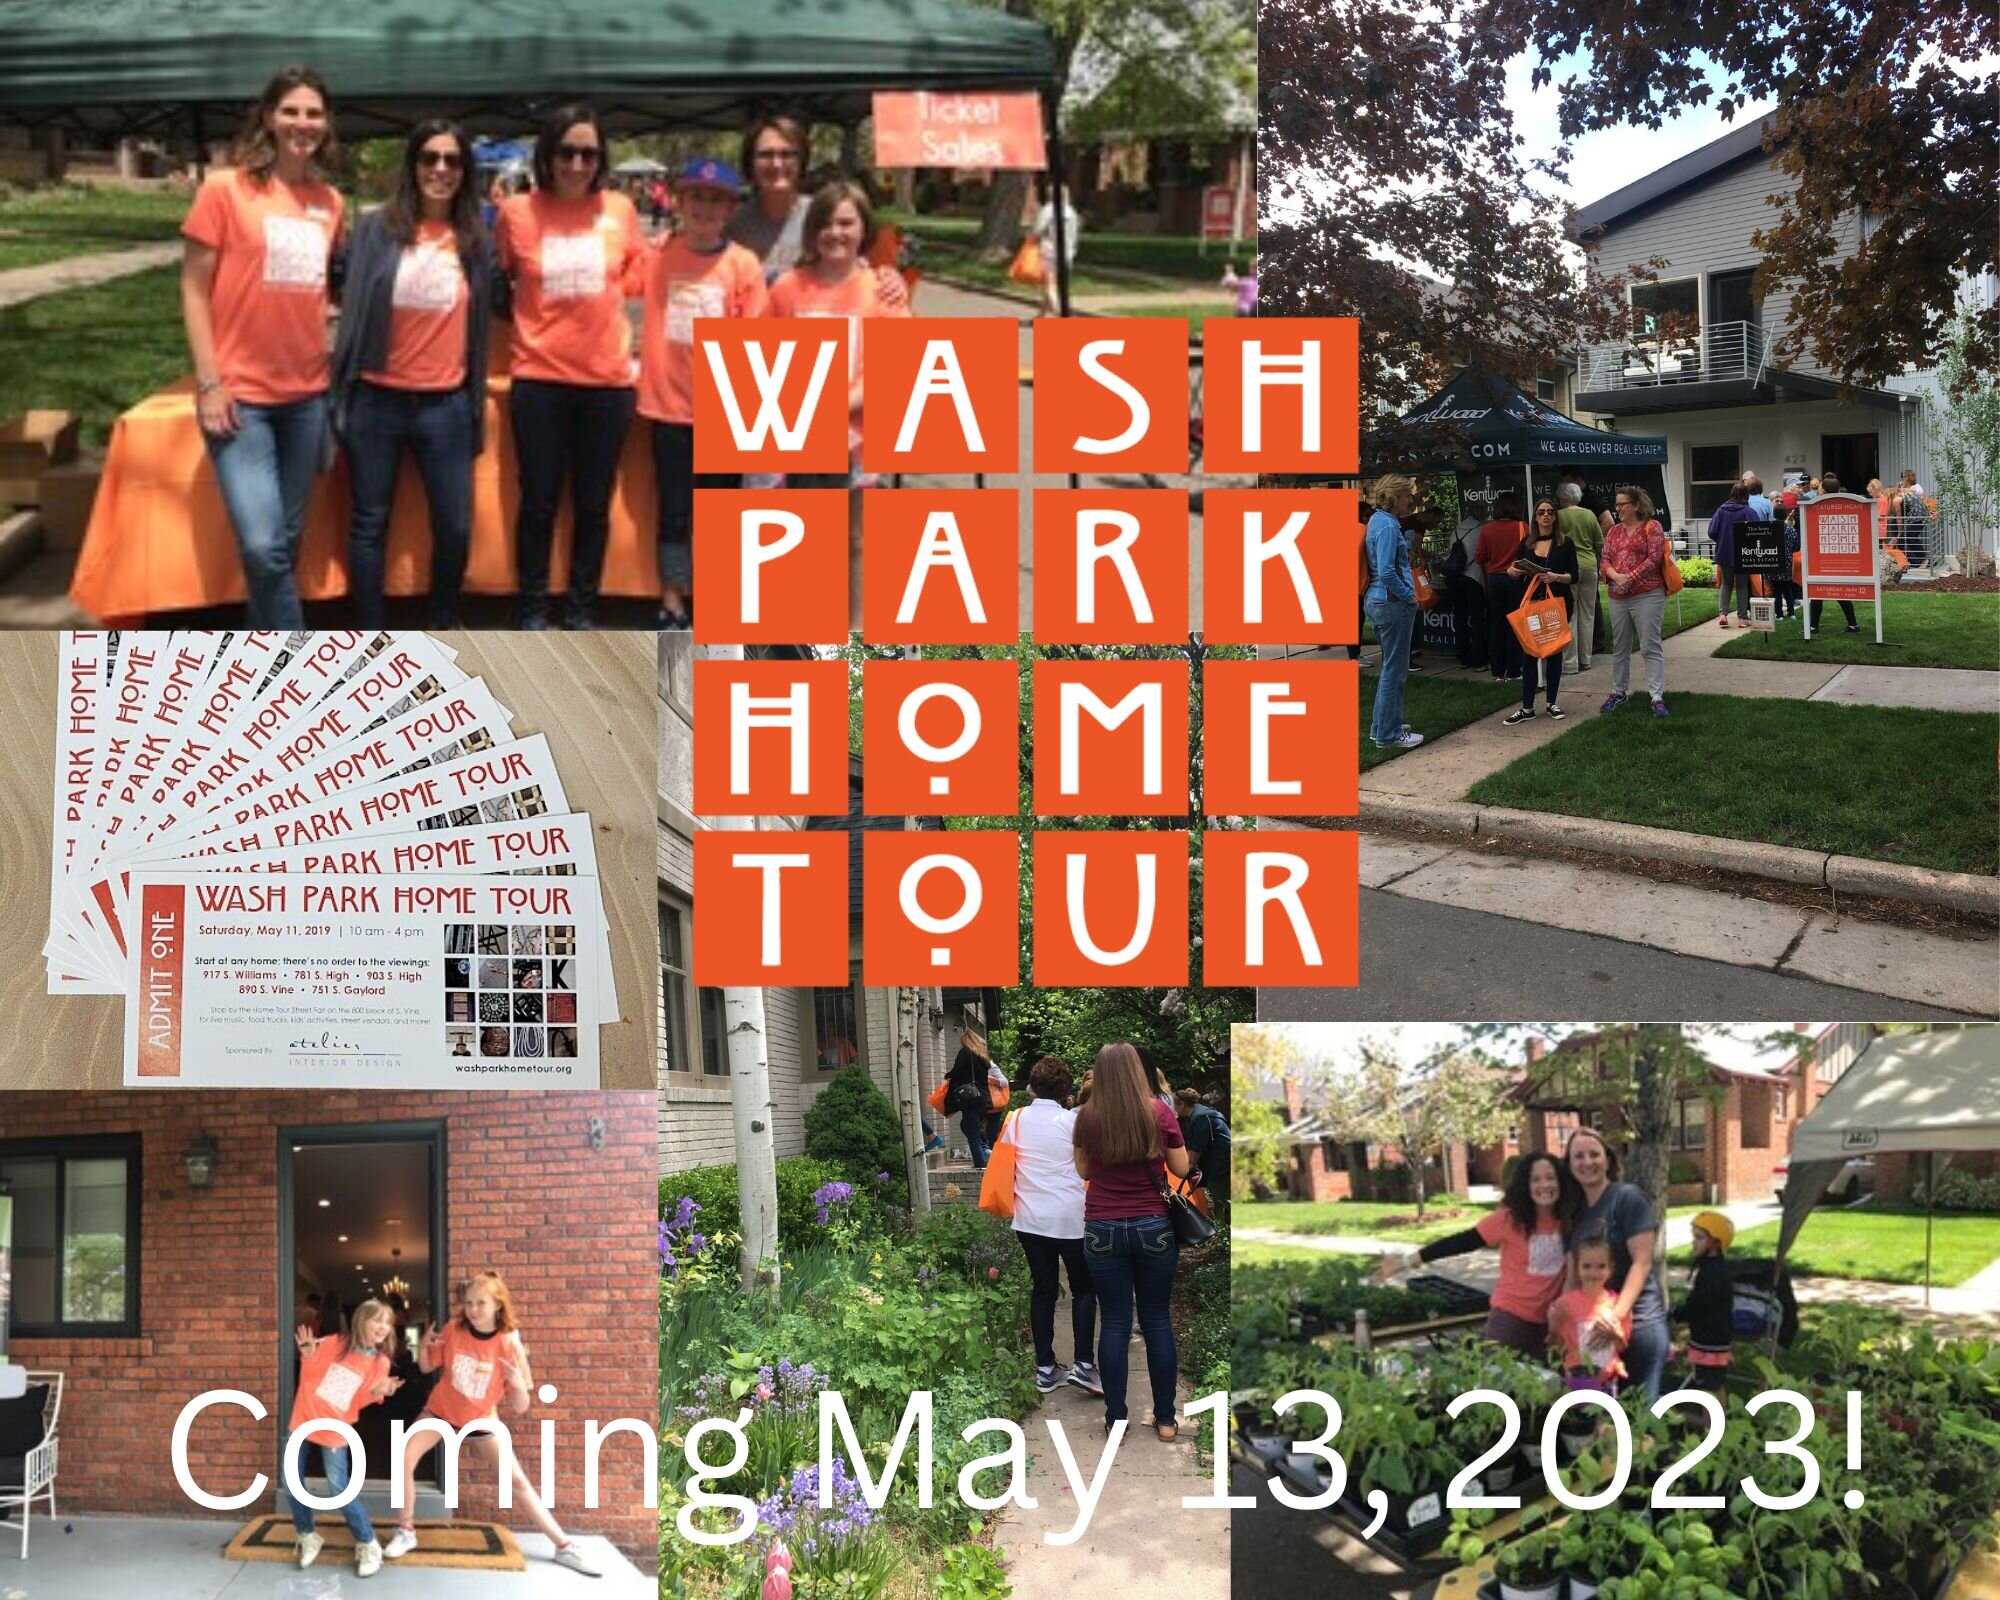 SATURDAY 10am-2pm: The Wash Park Home Tour &amp; Mother's Day Market Street fair is this weekend, and we can't think of a better way to see some great homes, shop local wares, AND support The LoVVe Project! We are so honored to have been selected as 